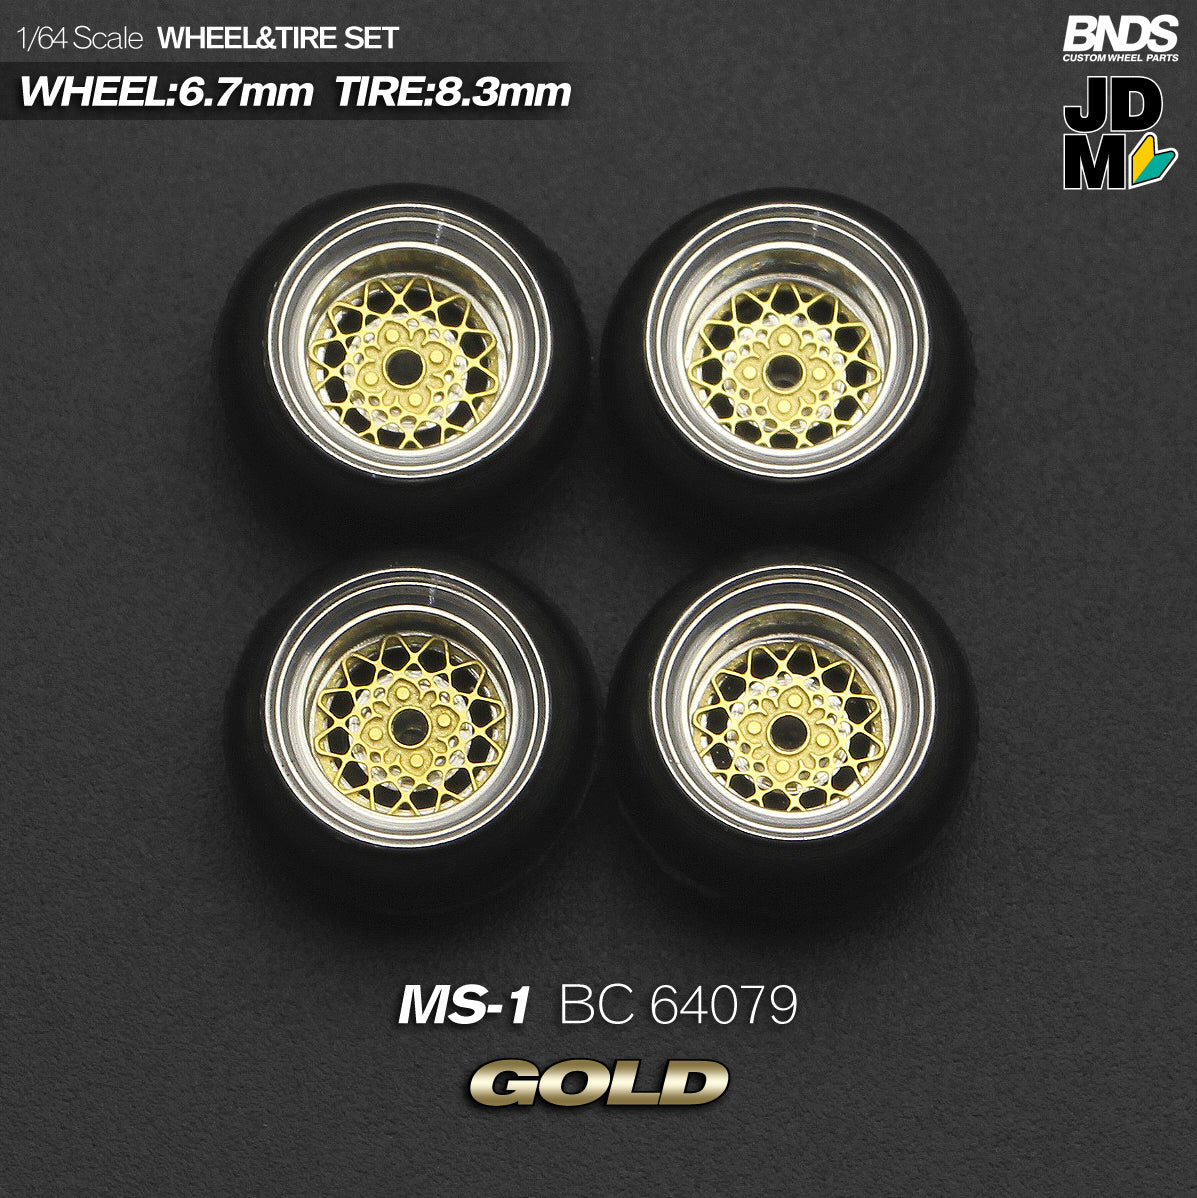 BNDS by Mot Hobby 1/64 Diecast Wheels and Tire Set - Alloy Classic 15-inch/8.3mm | BC64079 - BC64080